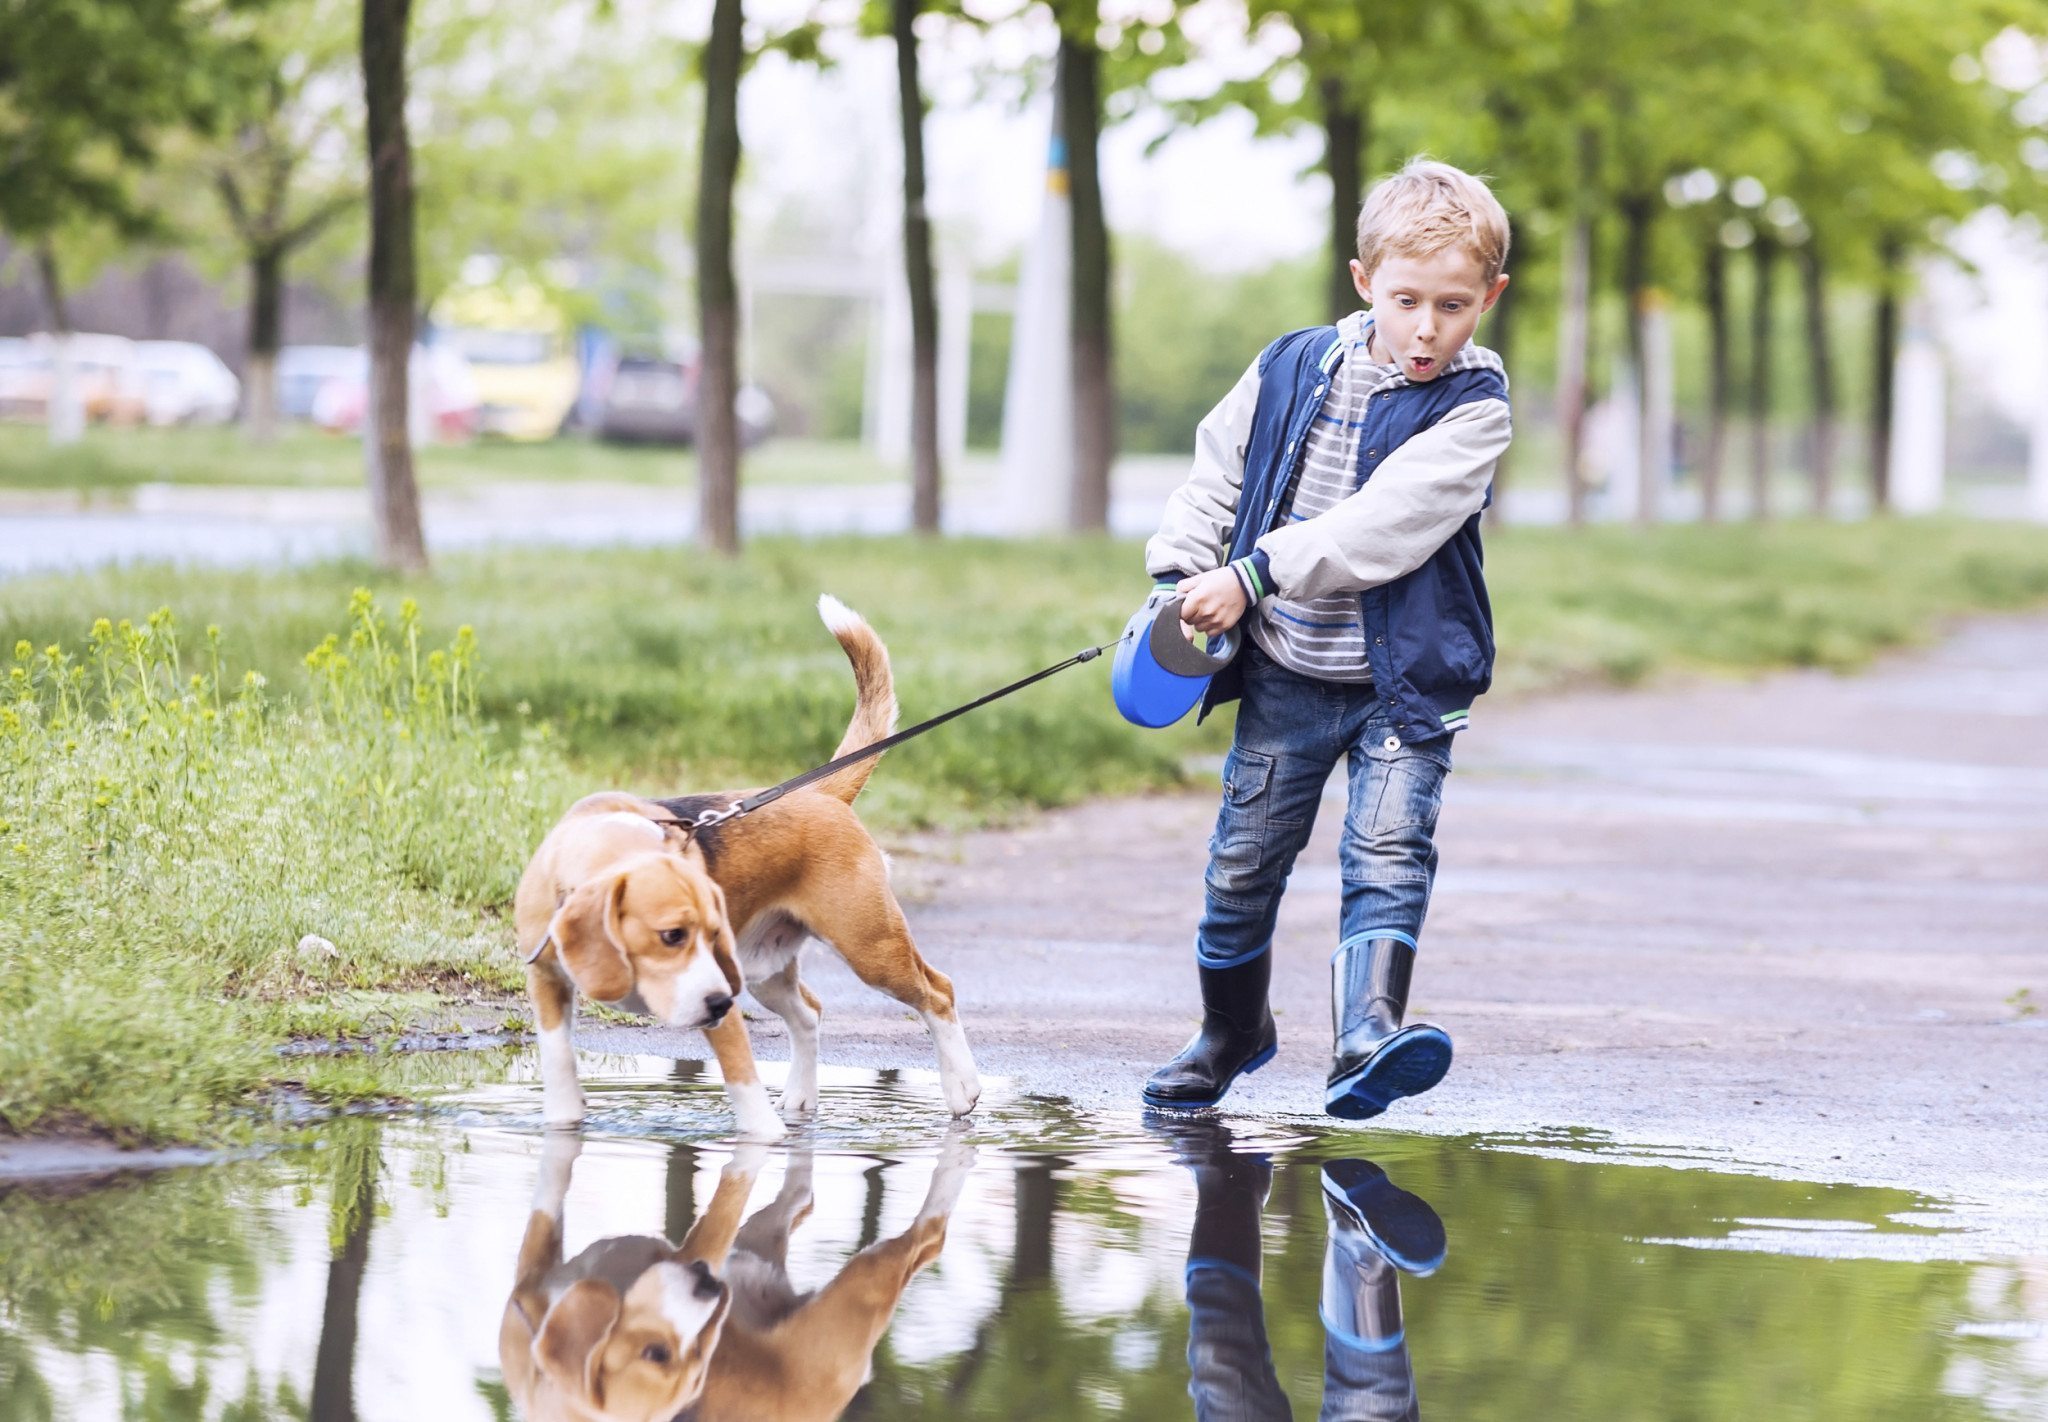 Puddles may be hazardous to your pet's health